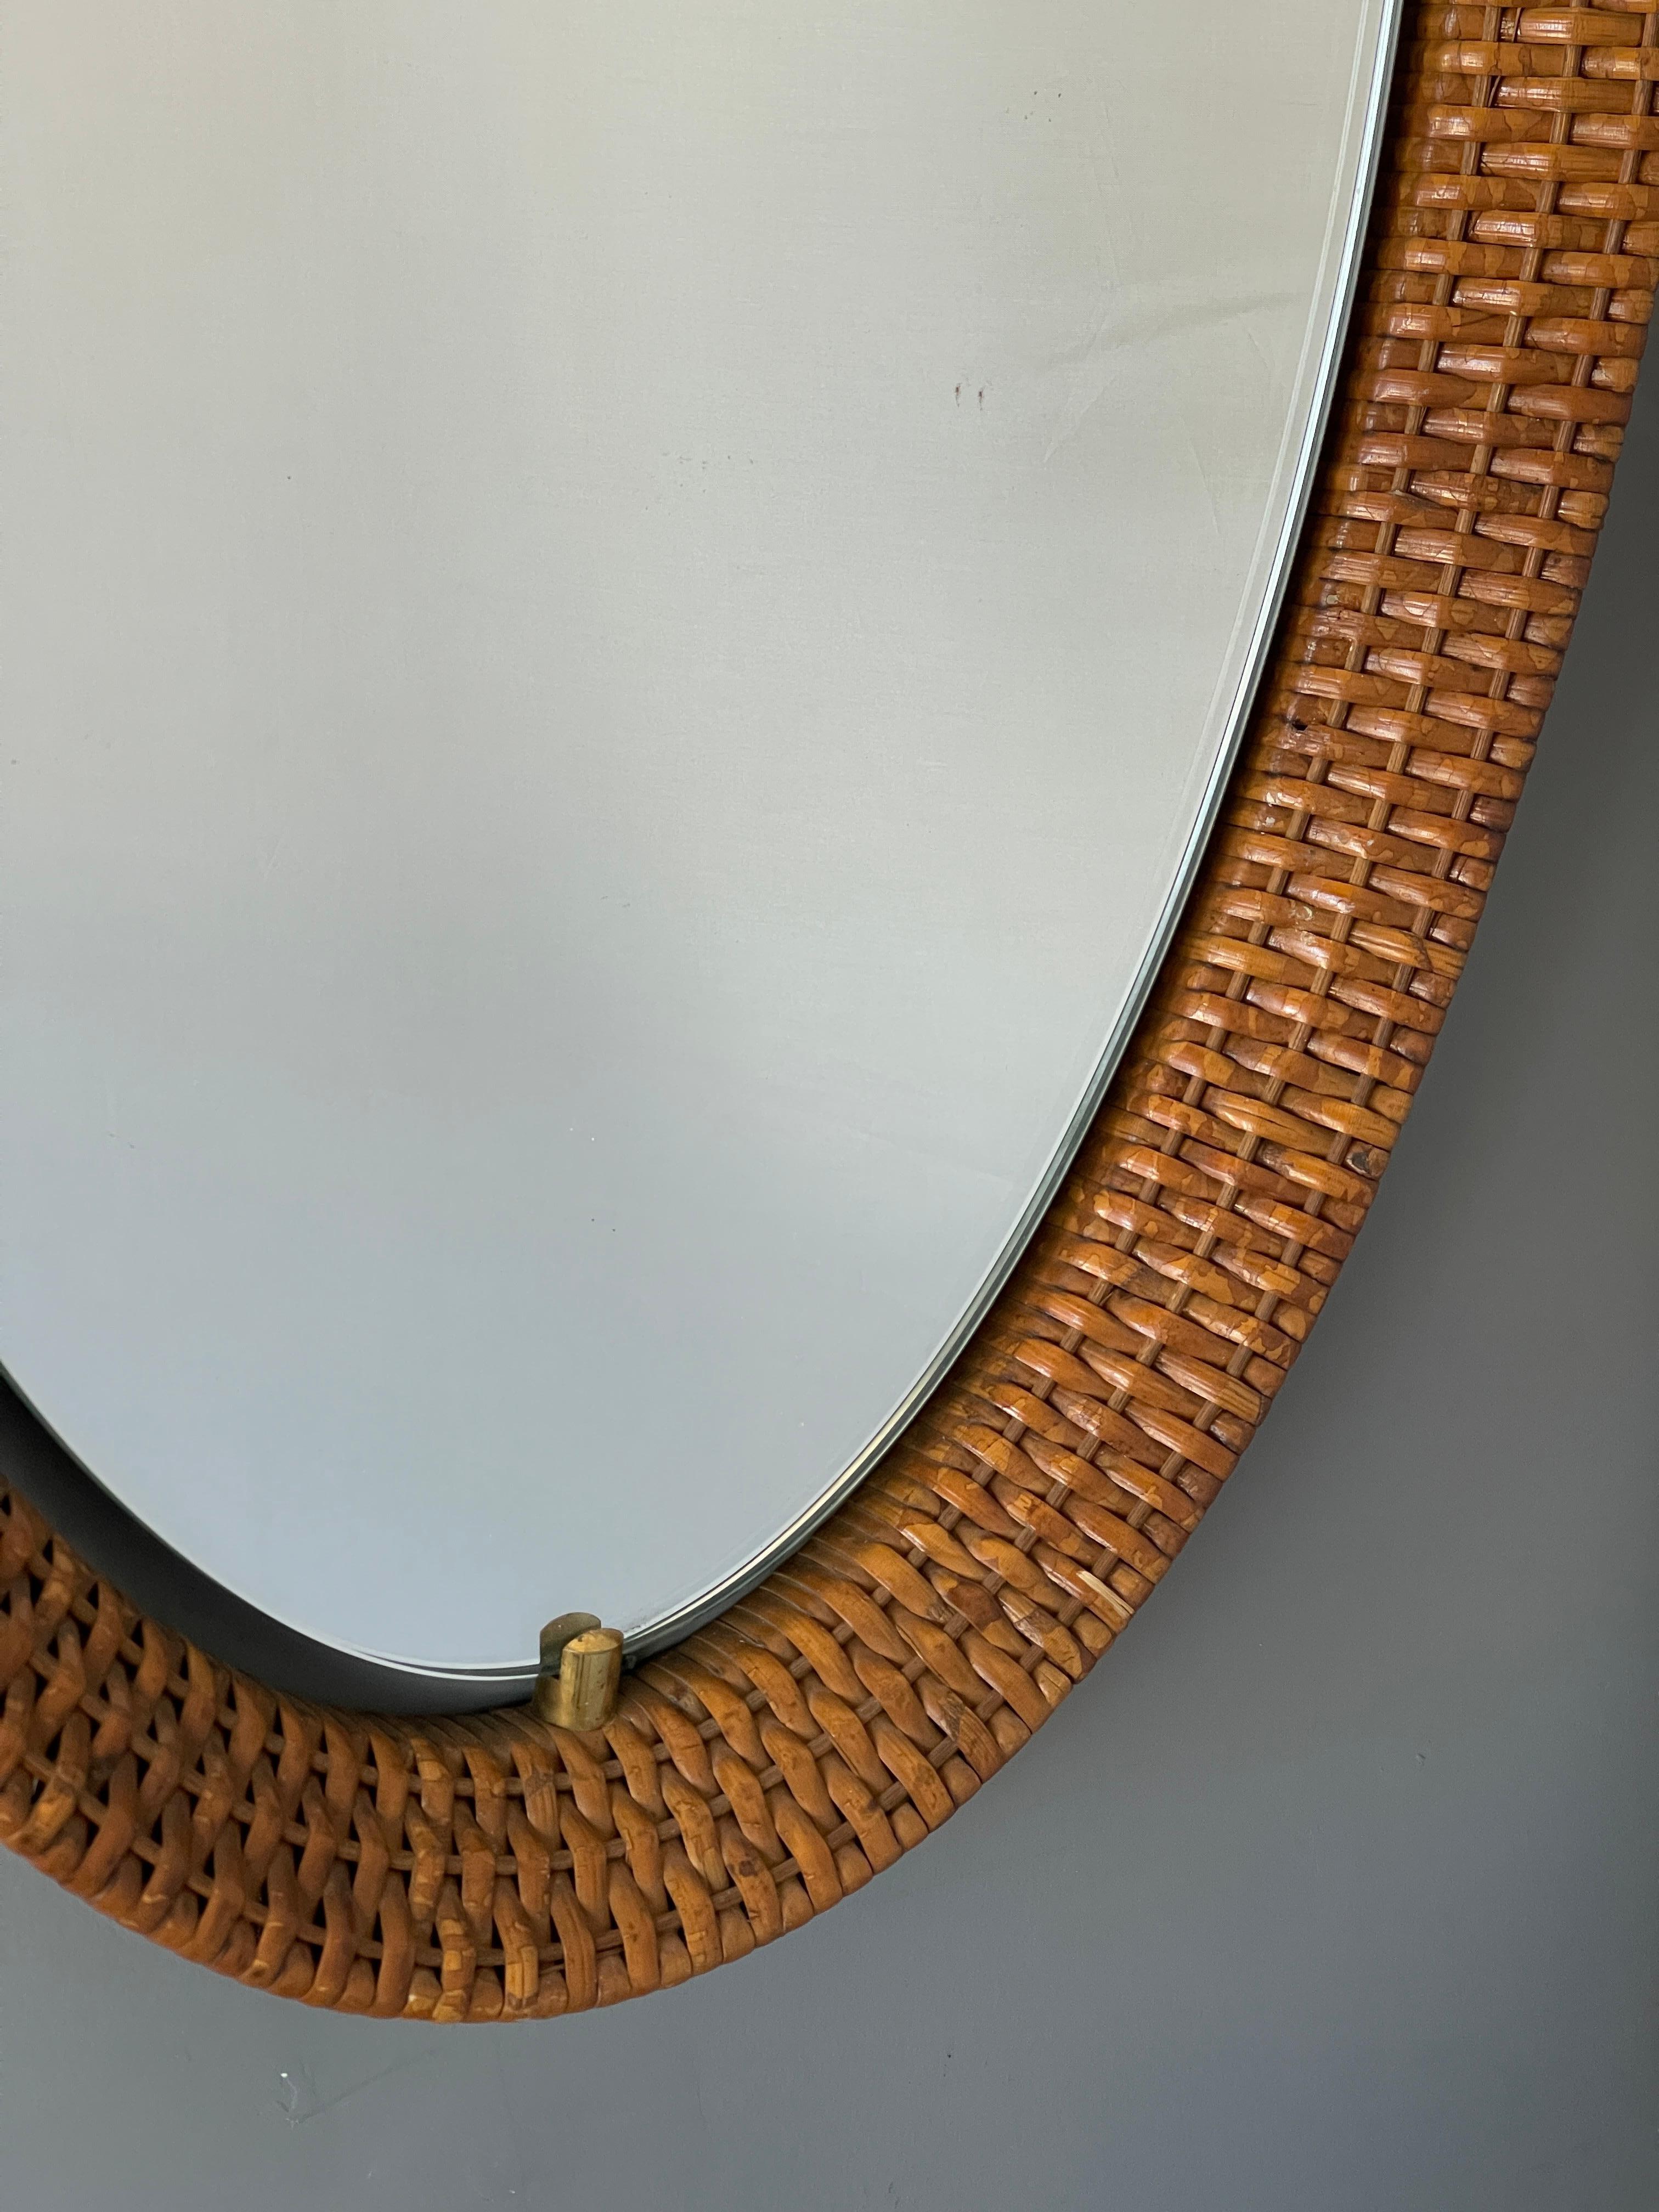 A wall mirror, produced in Italy, 1950s. Cut mirror glass is framed rattan, fixated by brass hardware.

Other designers of the period include Gio Ponti, Fontana Arte, Max Ingrand, Franco Albini, and Josef Frank.